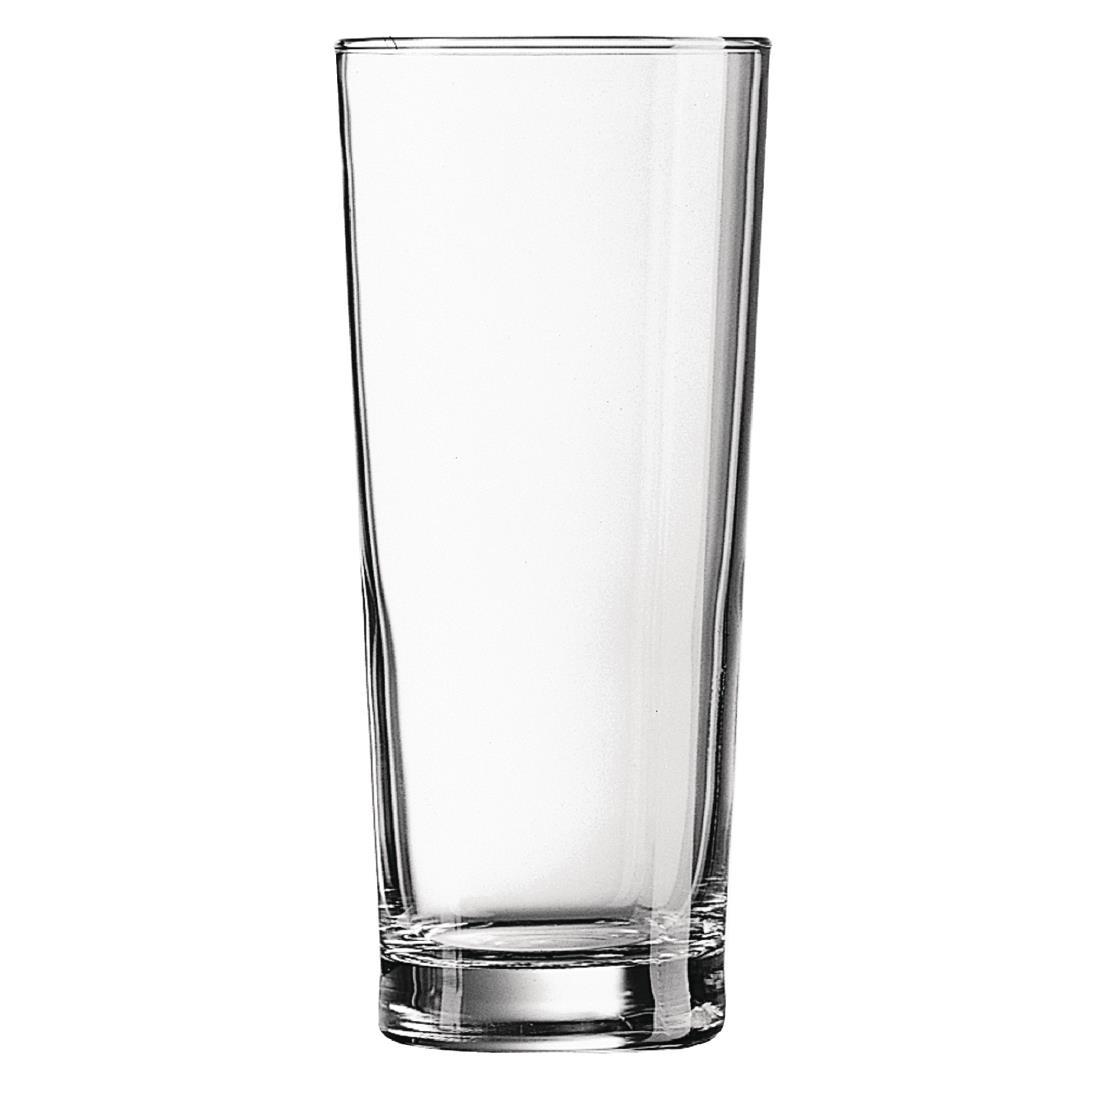 Arcoroc Premier Nucleated Hi Ball Glasses 285ml CE Marked (Pack of 48) - DP083  - 1